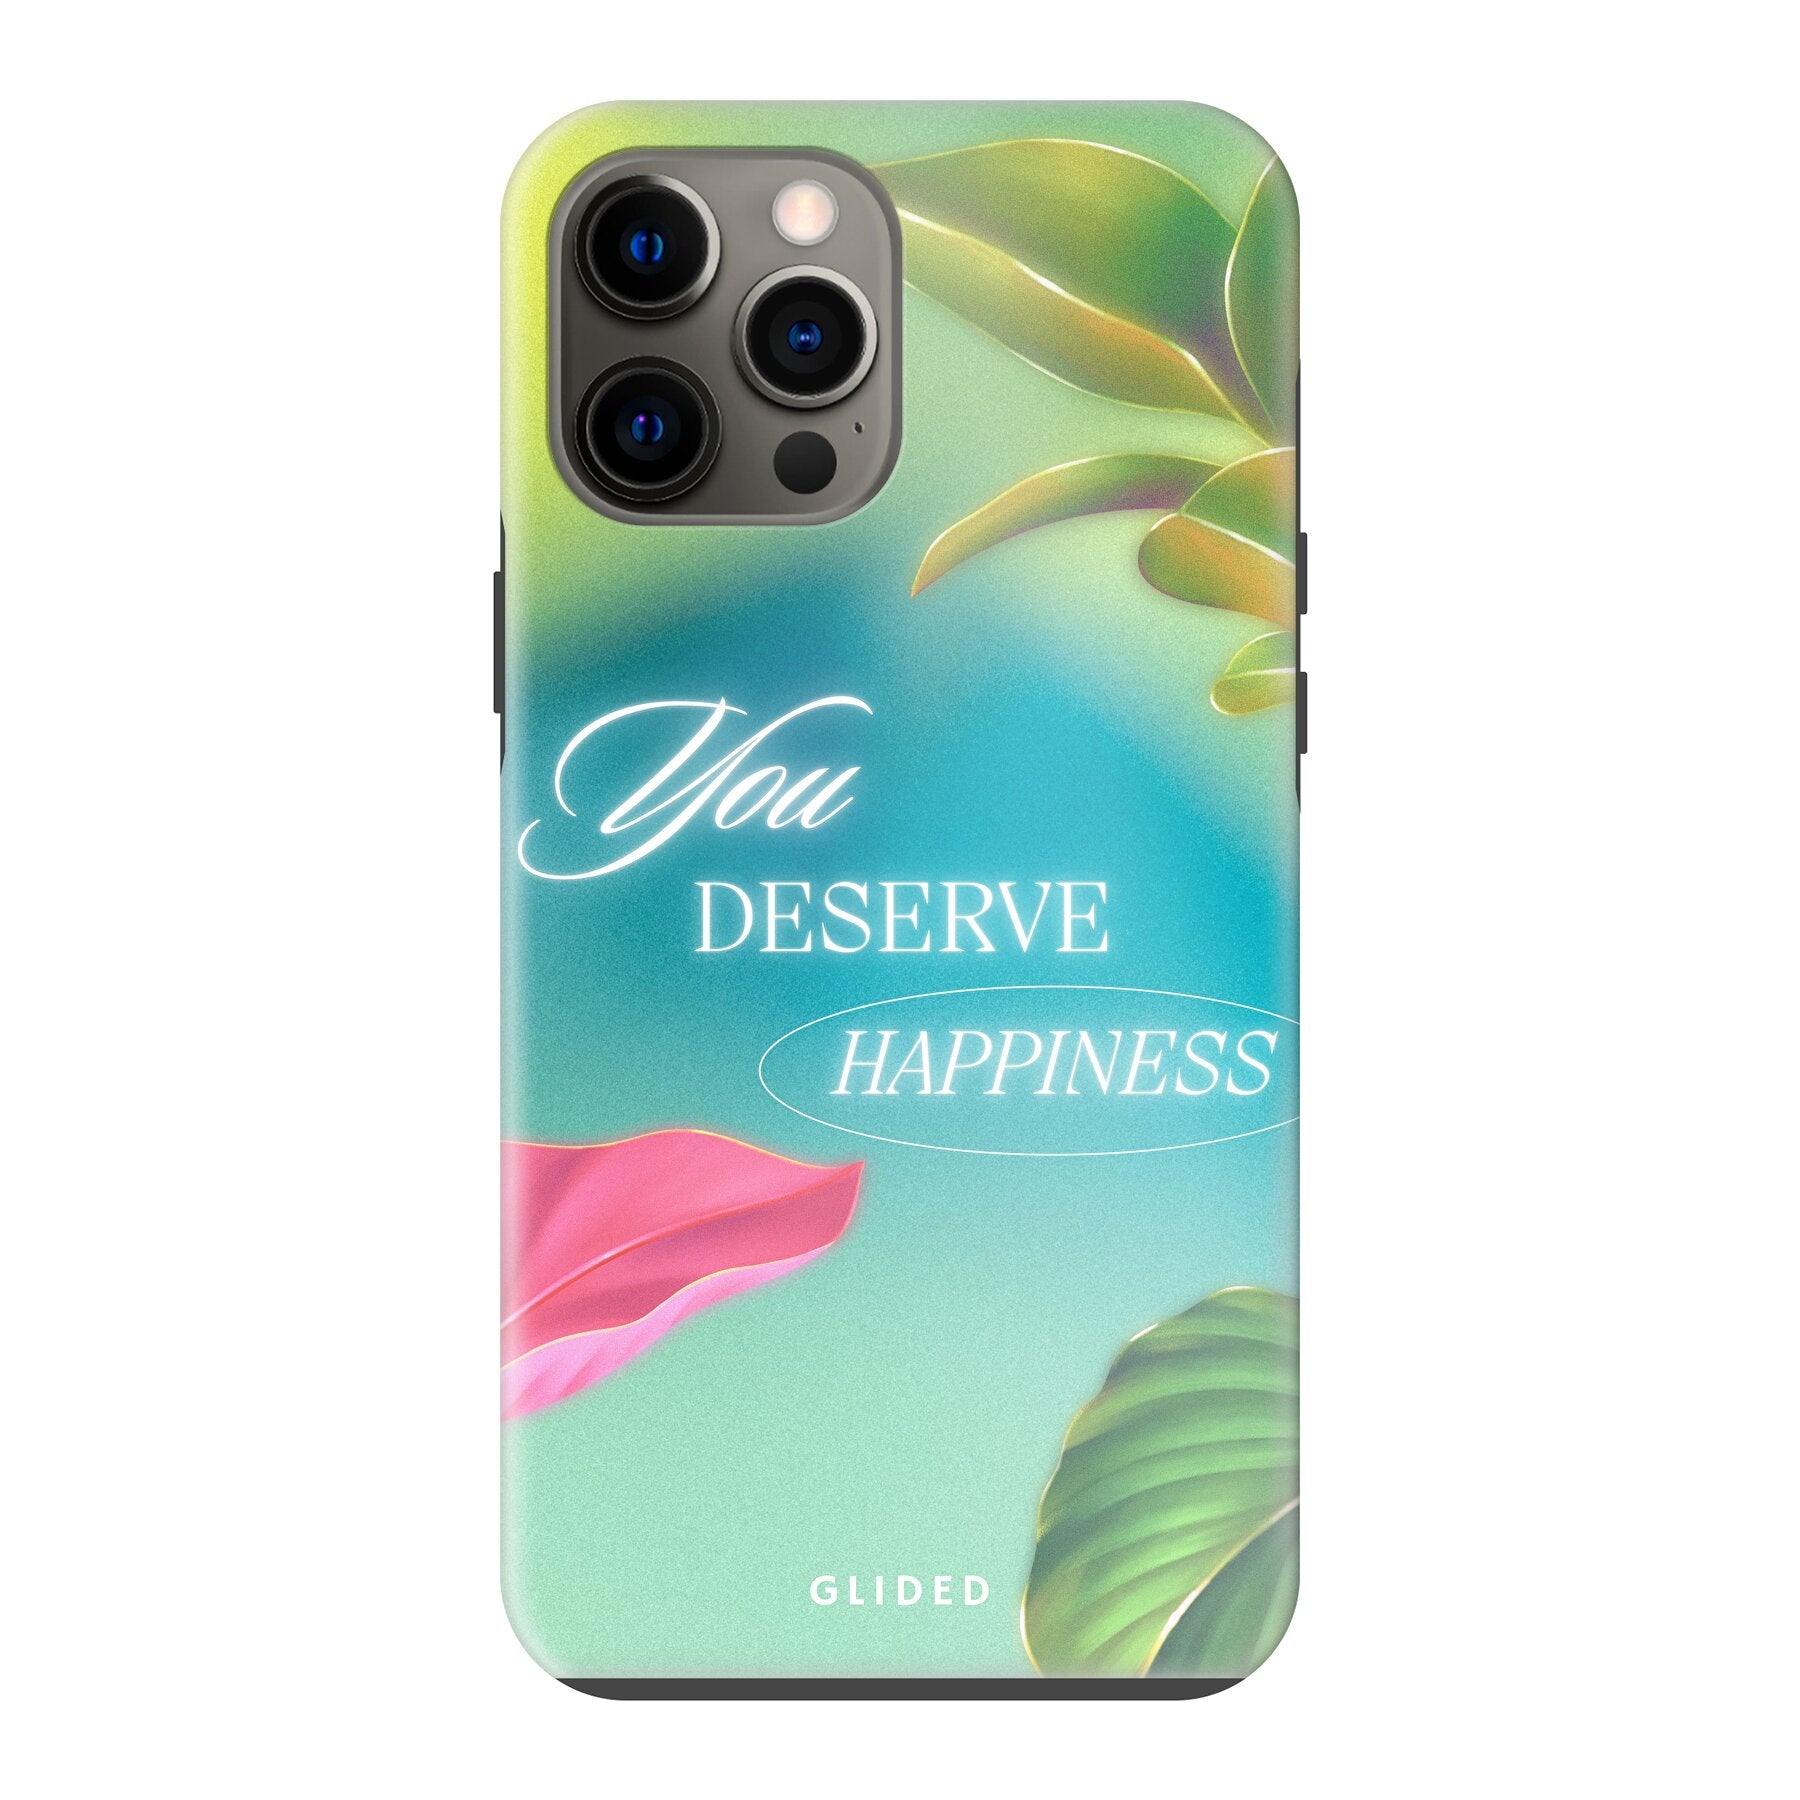 Happiness - iPhone 12 Pro Max - MagSafe Tough case